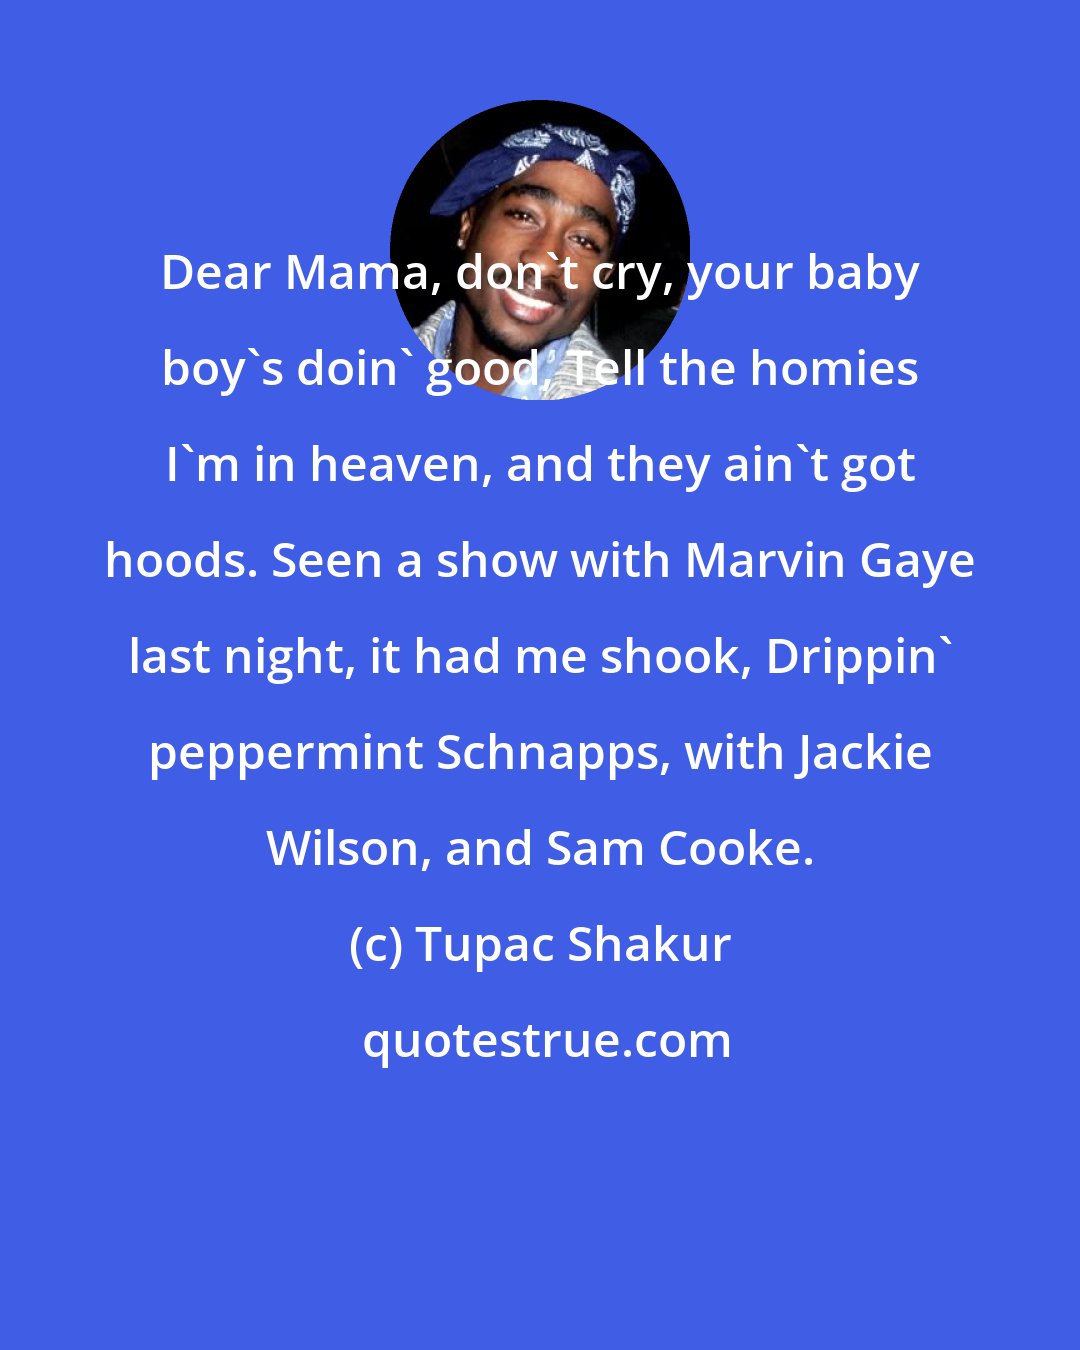 Tupac Shakur: Dear Mama, don't cry, your baby boy's doin' good, Tell the homies I'm in heaven, and they ain't got hoods. Seen a show with Marvin Gaye last night, it had me shook, Drippin' peppermint Schnapps, with Jackie Wilson, and Sam Cooke.